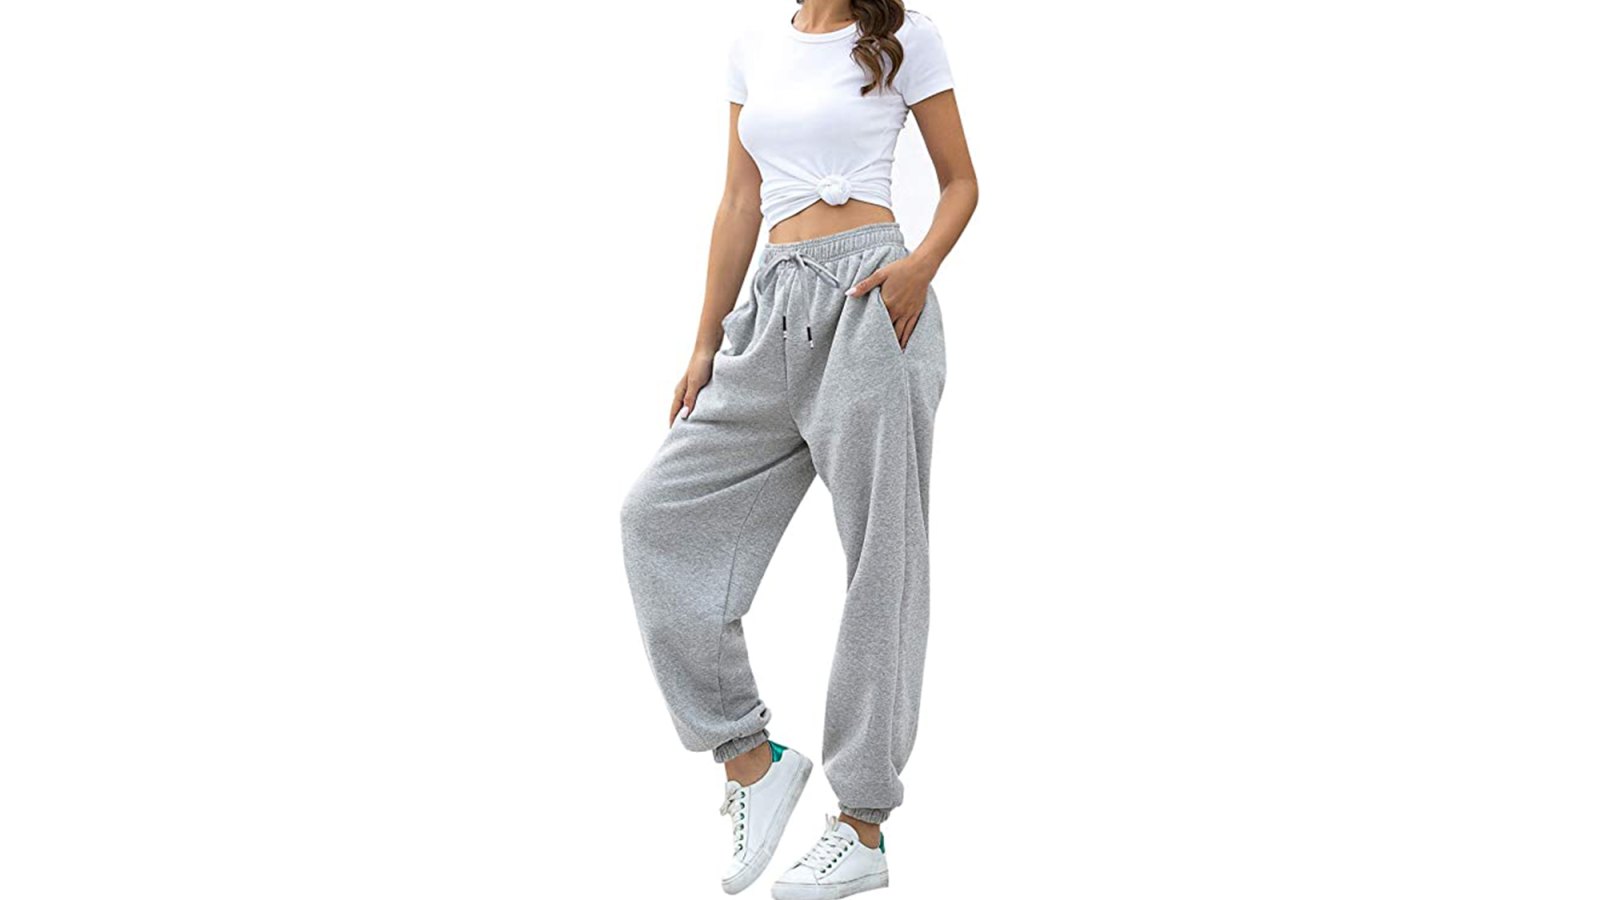 Slouchy High-Waisted Cinched Sweatpants  Trousers women, Pants for women,  Comfy sweats